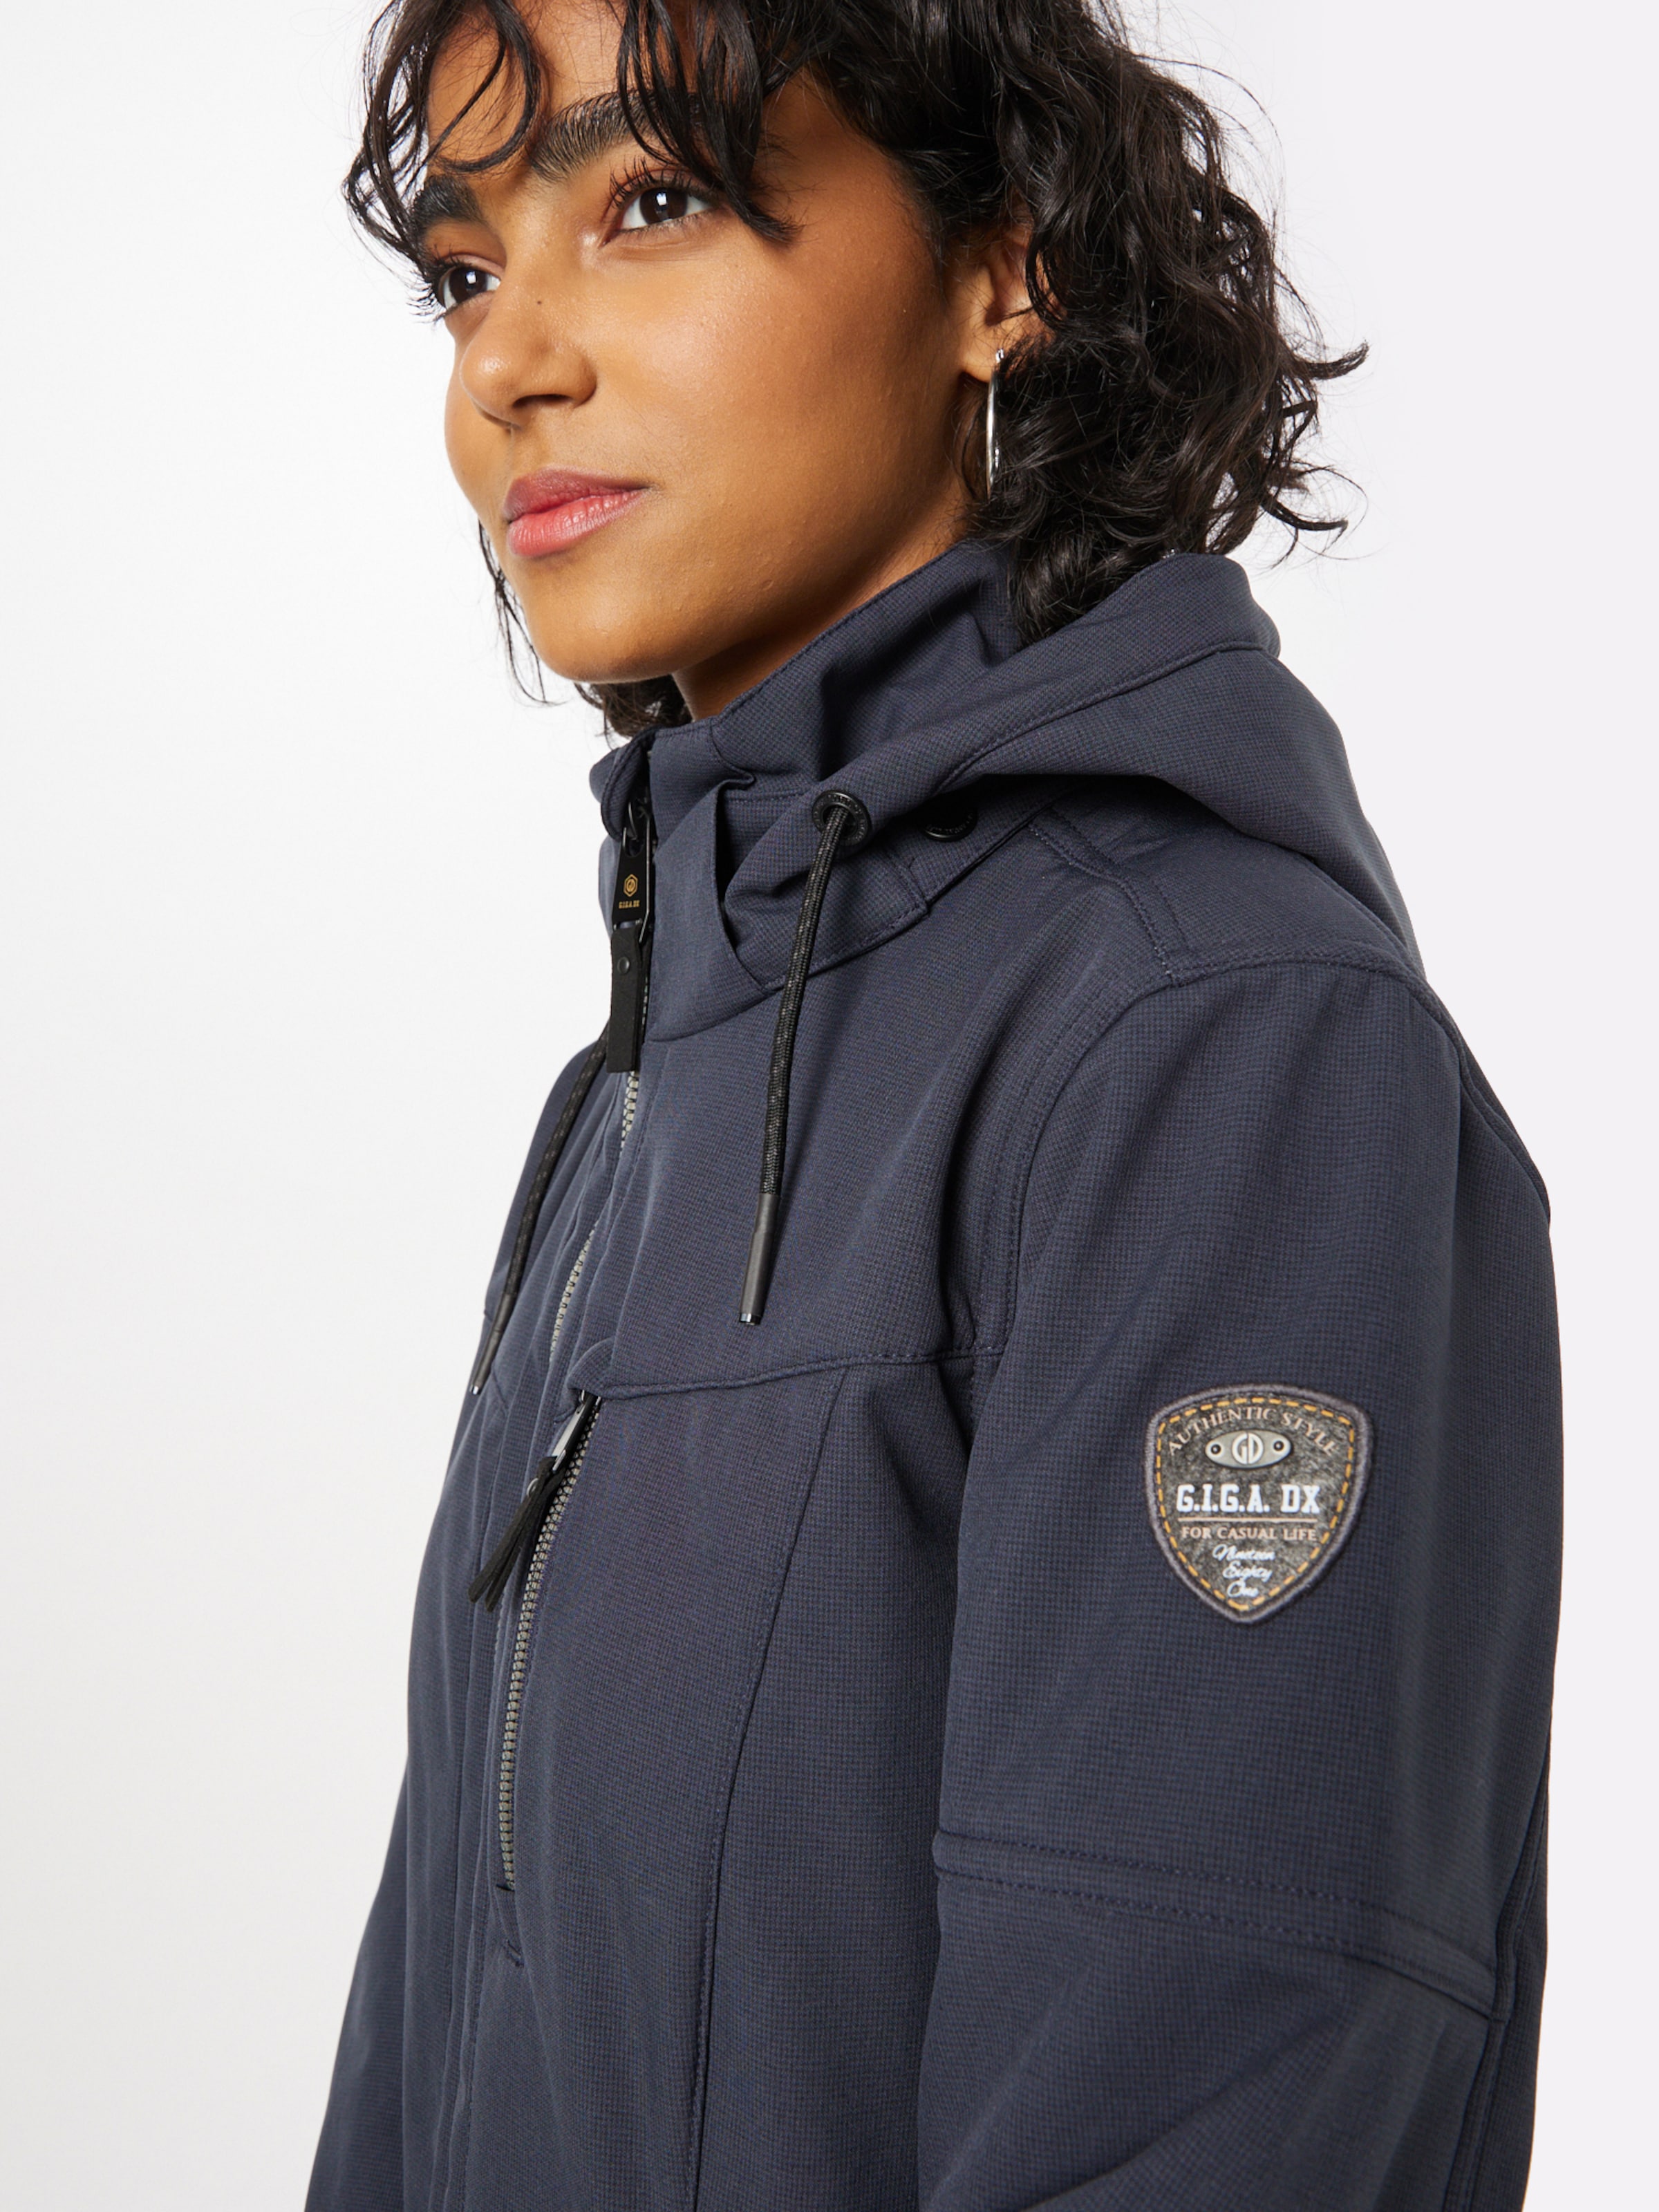 G.I.G.A. DX by killtec Outdoor Jacket in Dark Blue | ABOUT YOU